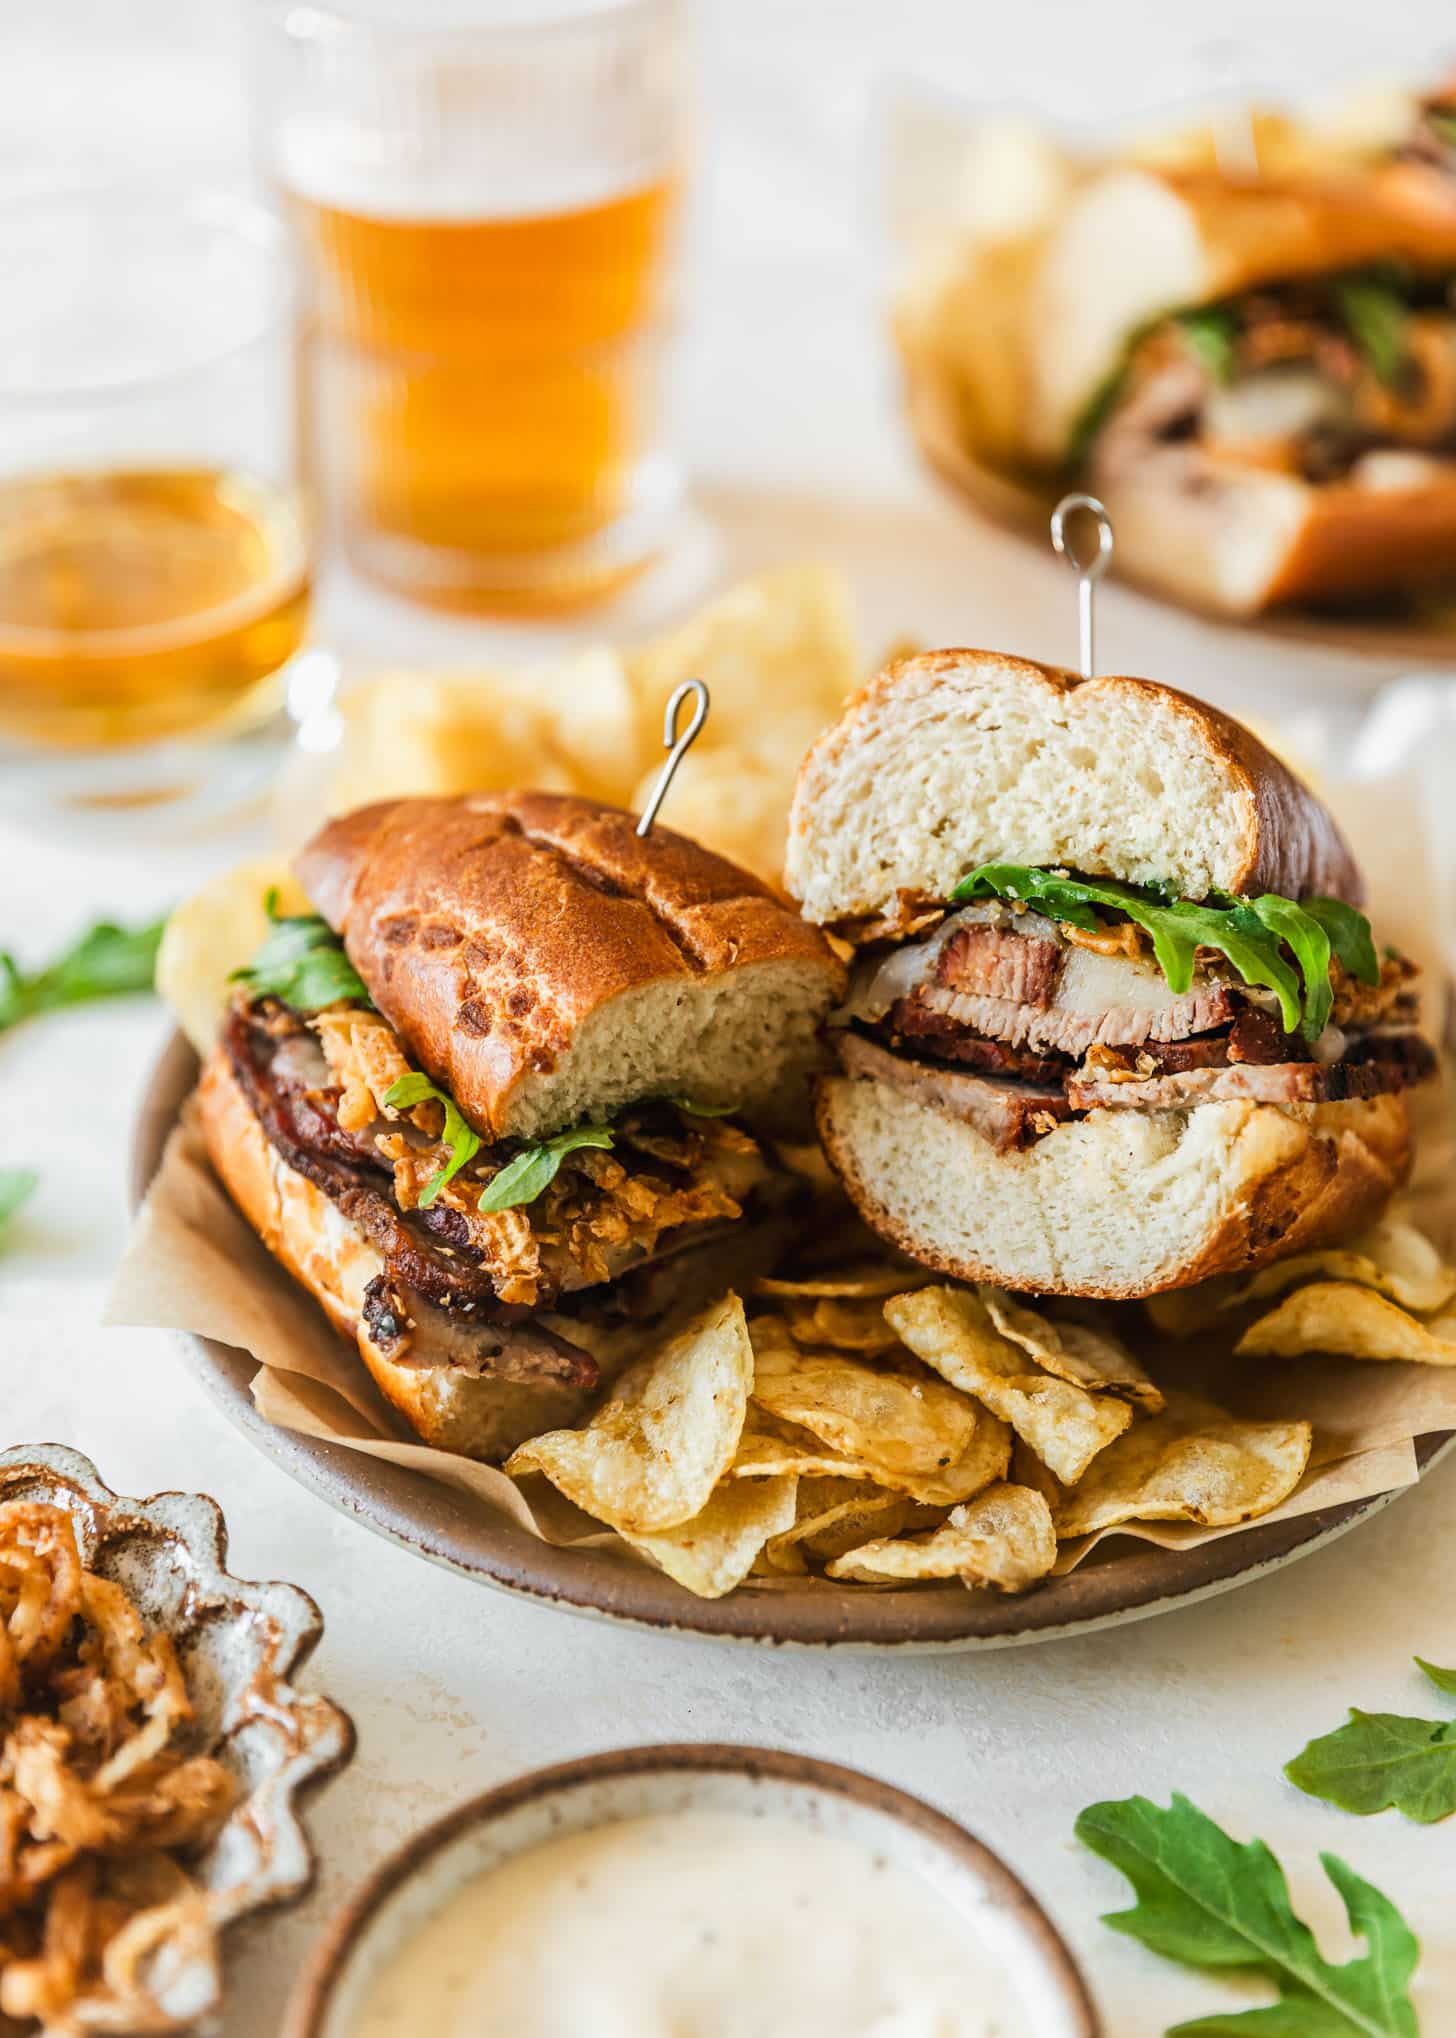 A brown plate with a tri-tip sandwich and potato chips on a beige background next to glasses of beer, a plate with a sandwich, and white and brown bowls of frizzled onions and garlic aioli.